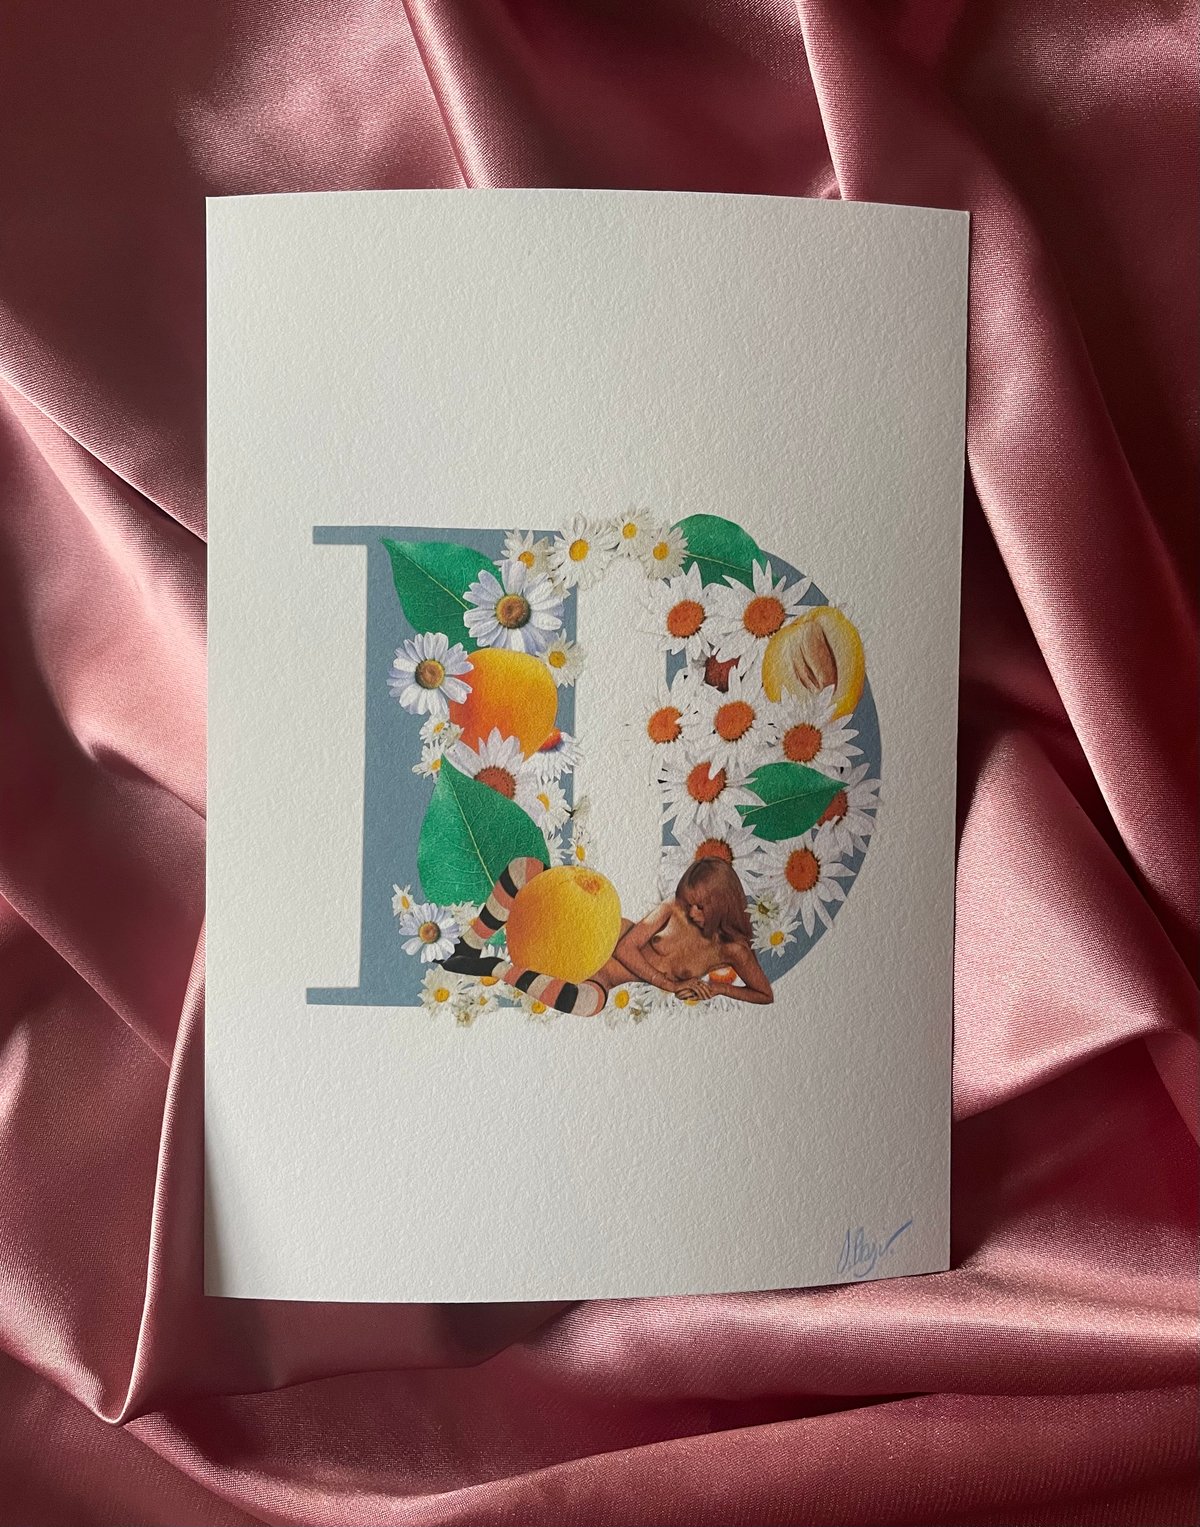 D is for Damson letter print 